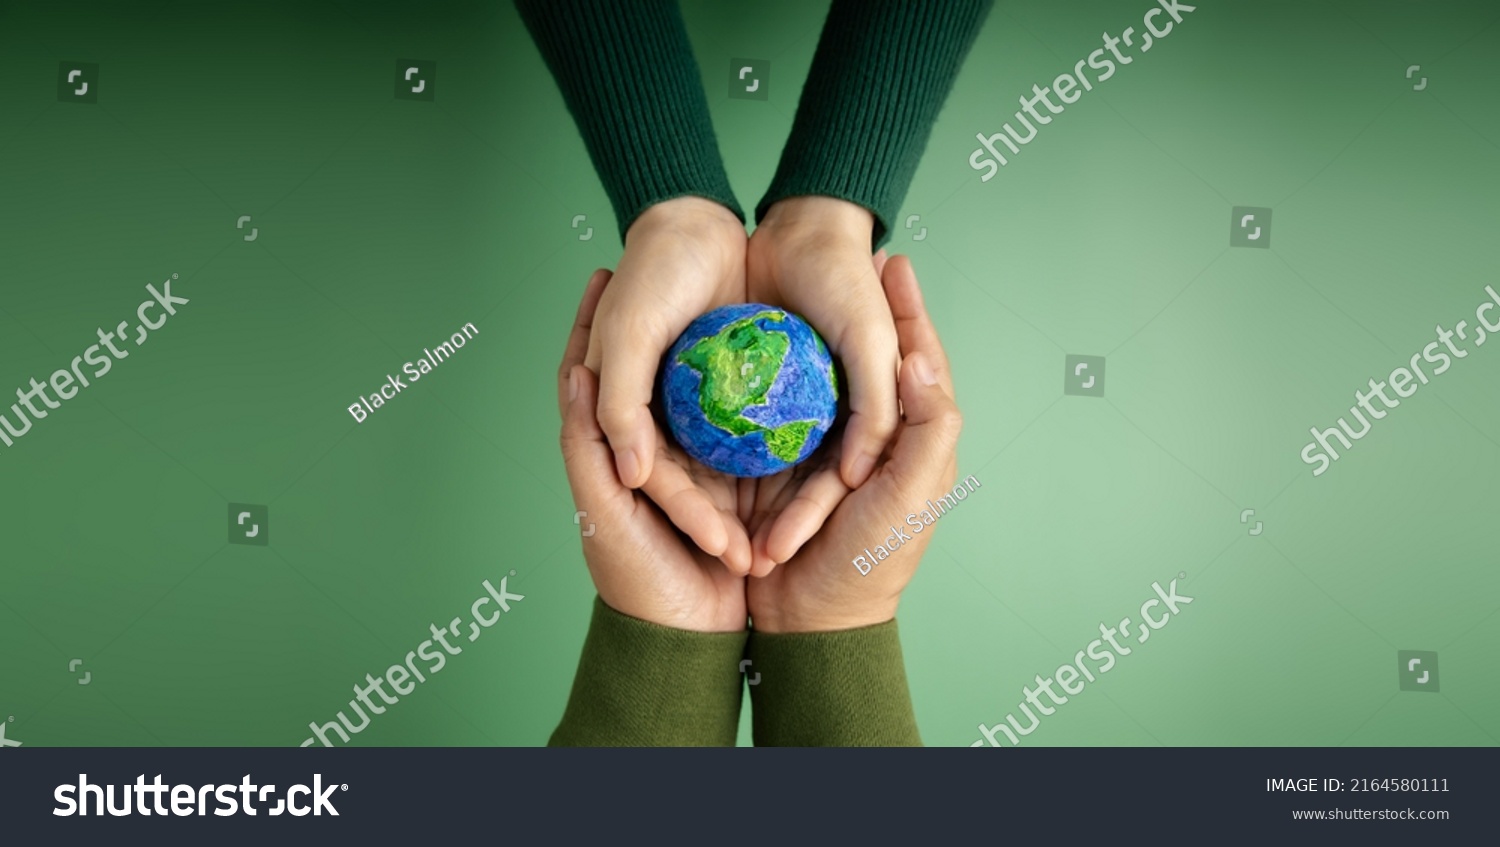 World Earth Day Concept. Green Energy, ESG, Renewable and Sustainable Resources. Environmental Care. Hands of People  Embracing a Handmade Globe. Protecting Planet Together. Top View #2164580111